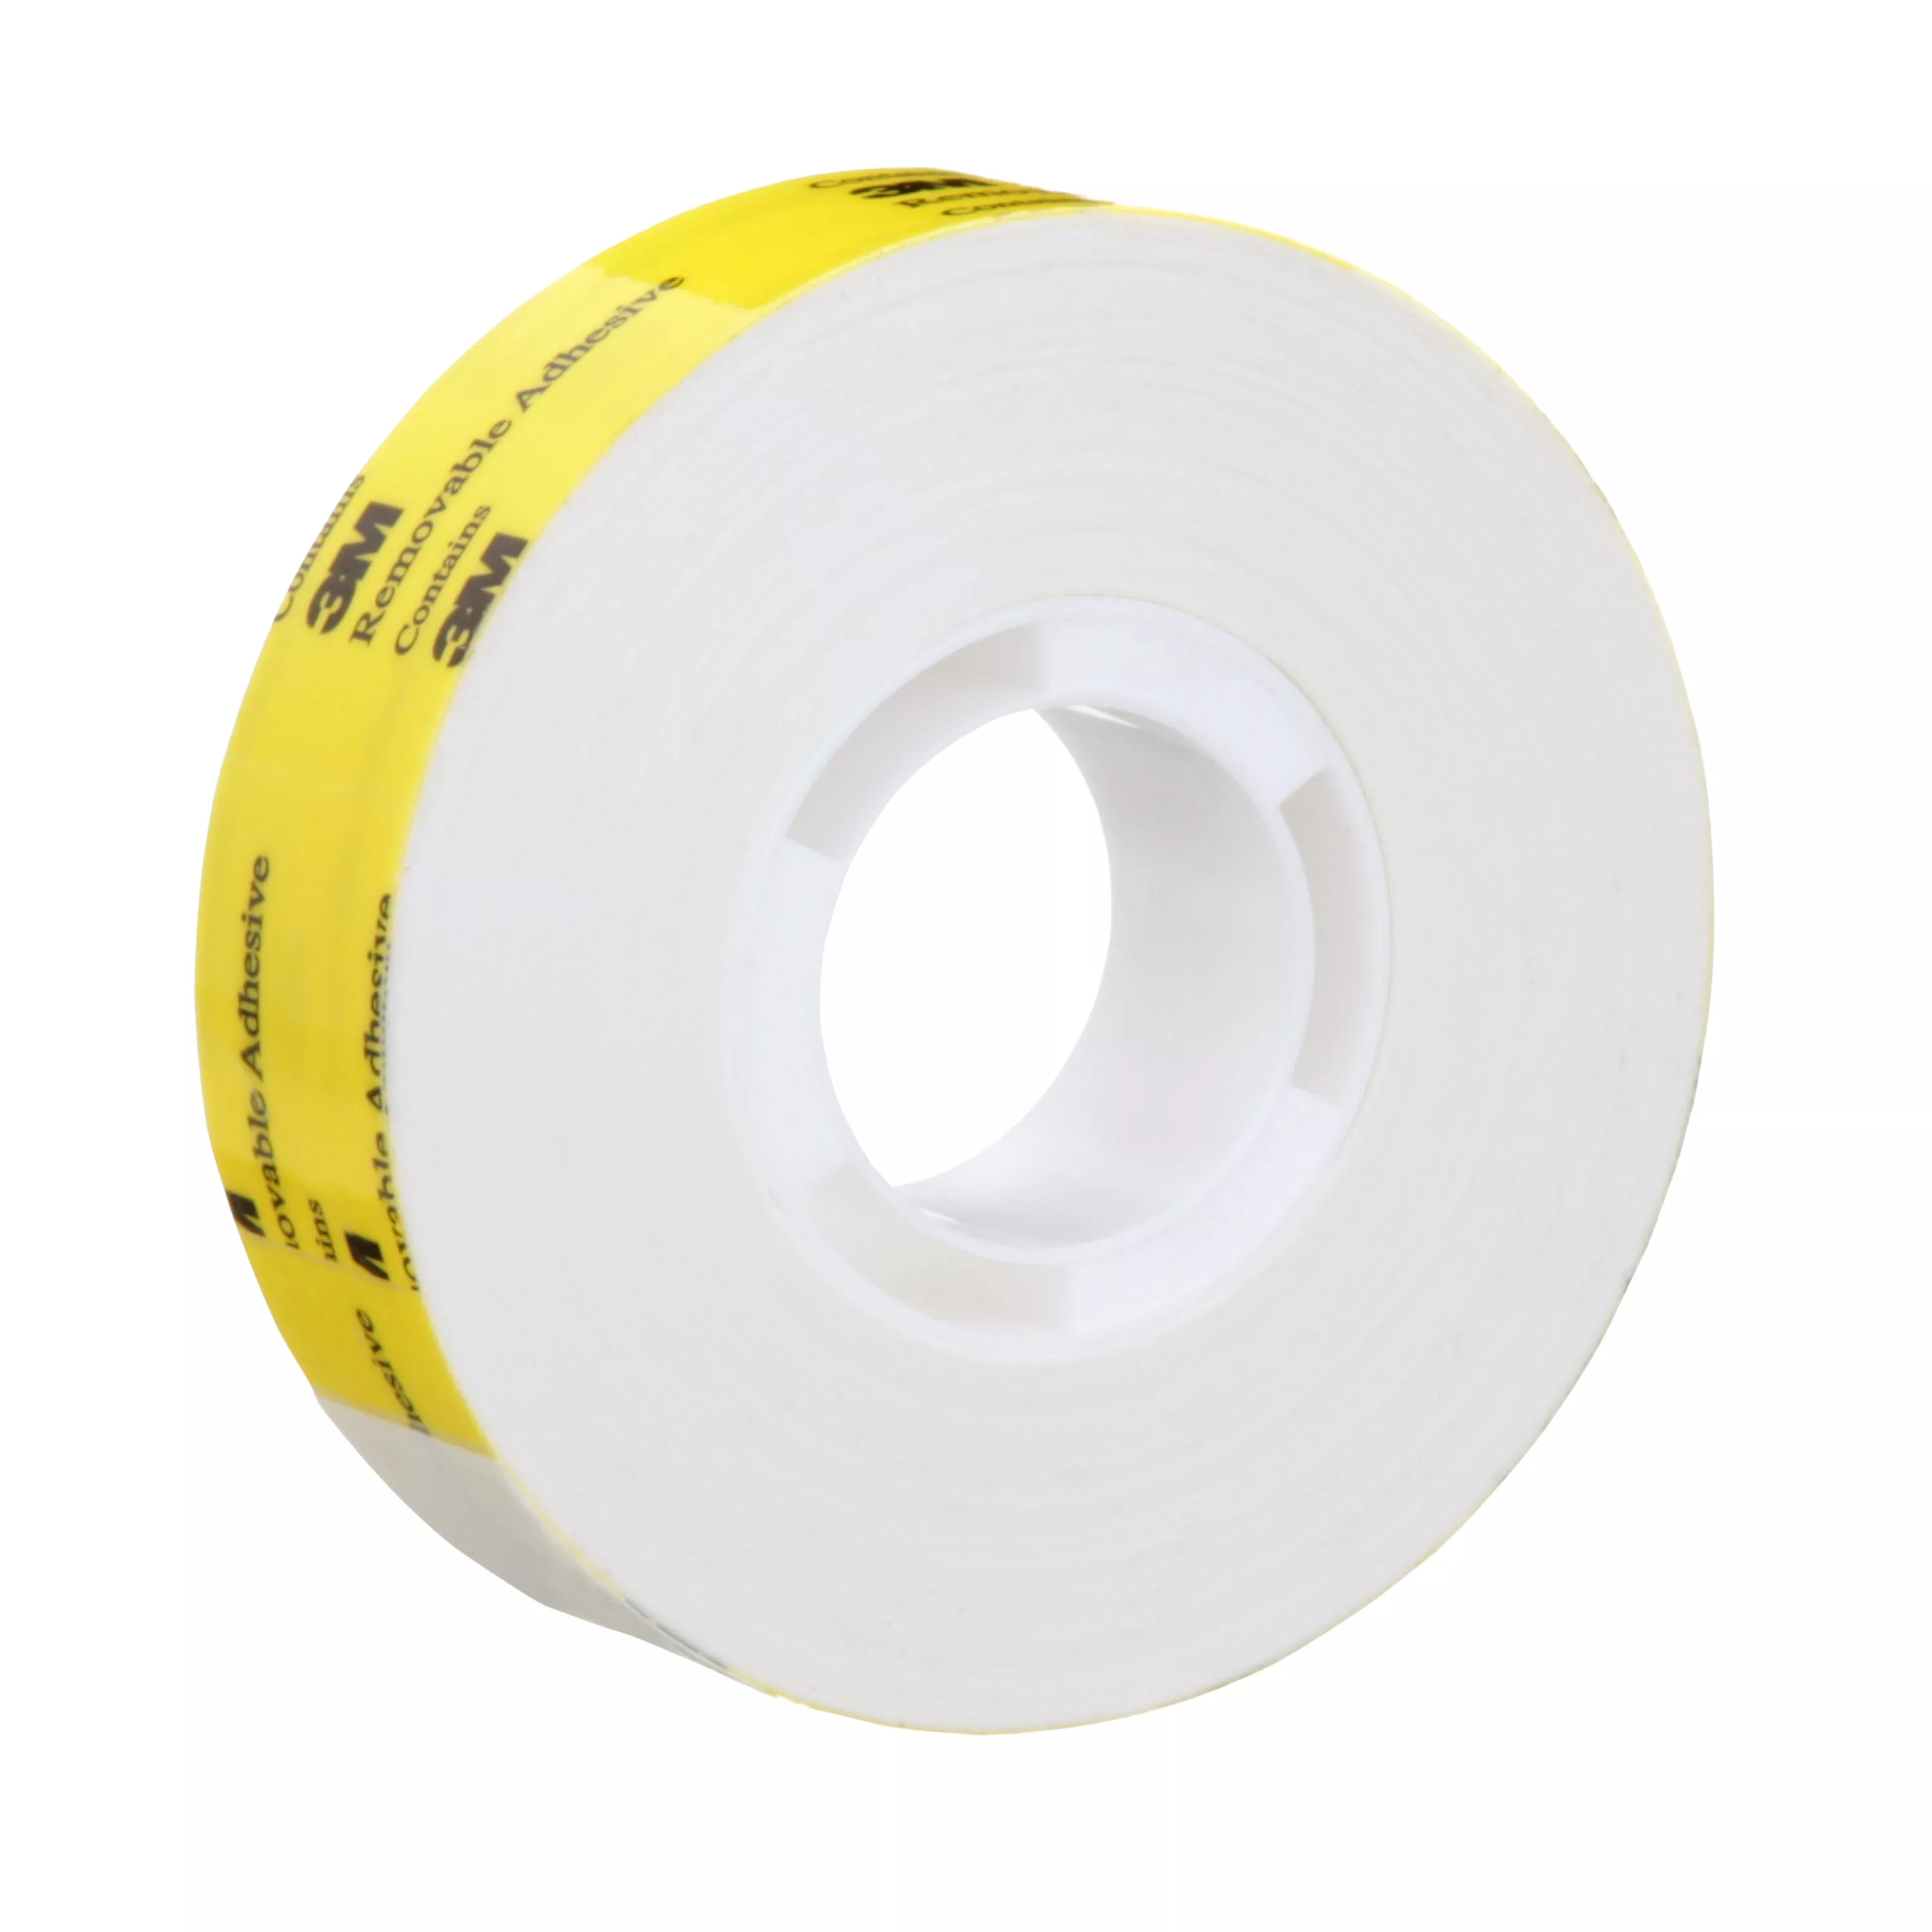 SKU 7000048496 | Scotch® ATG Repositionable Double Coated Tissue Tape 928